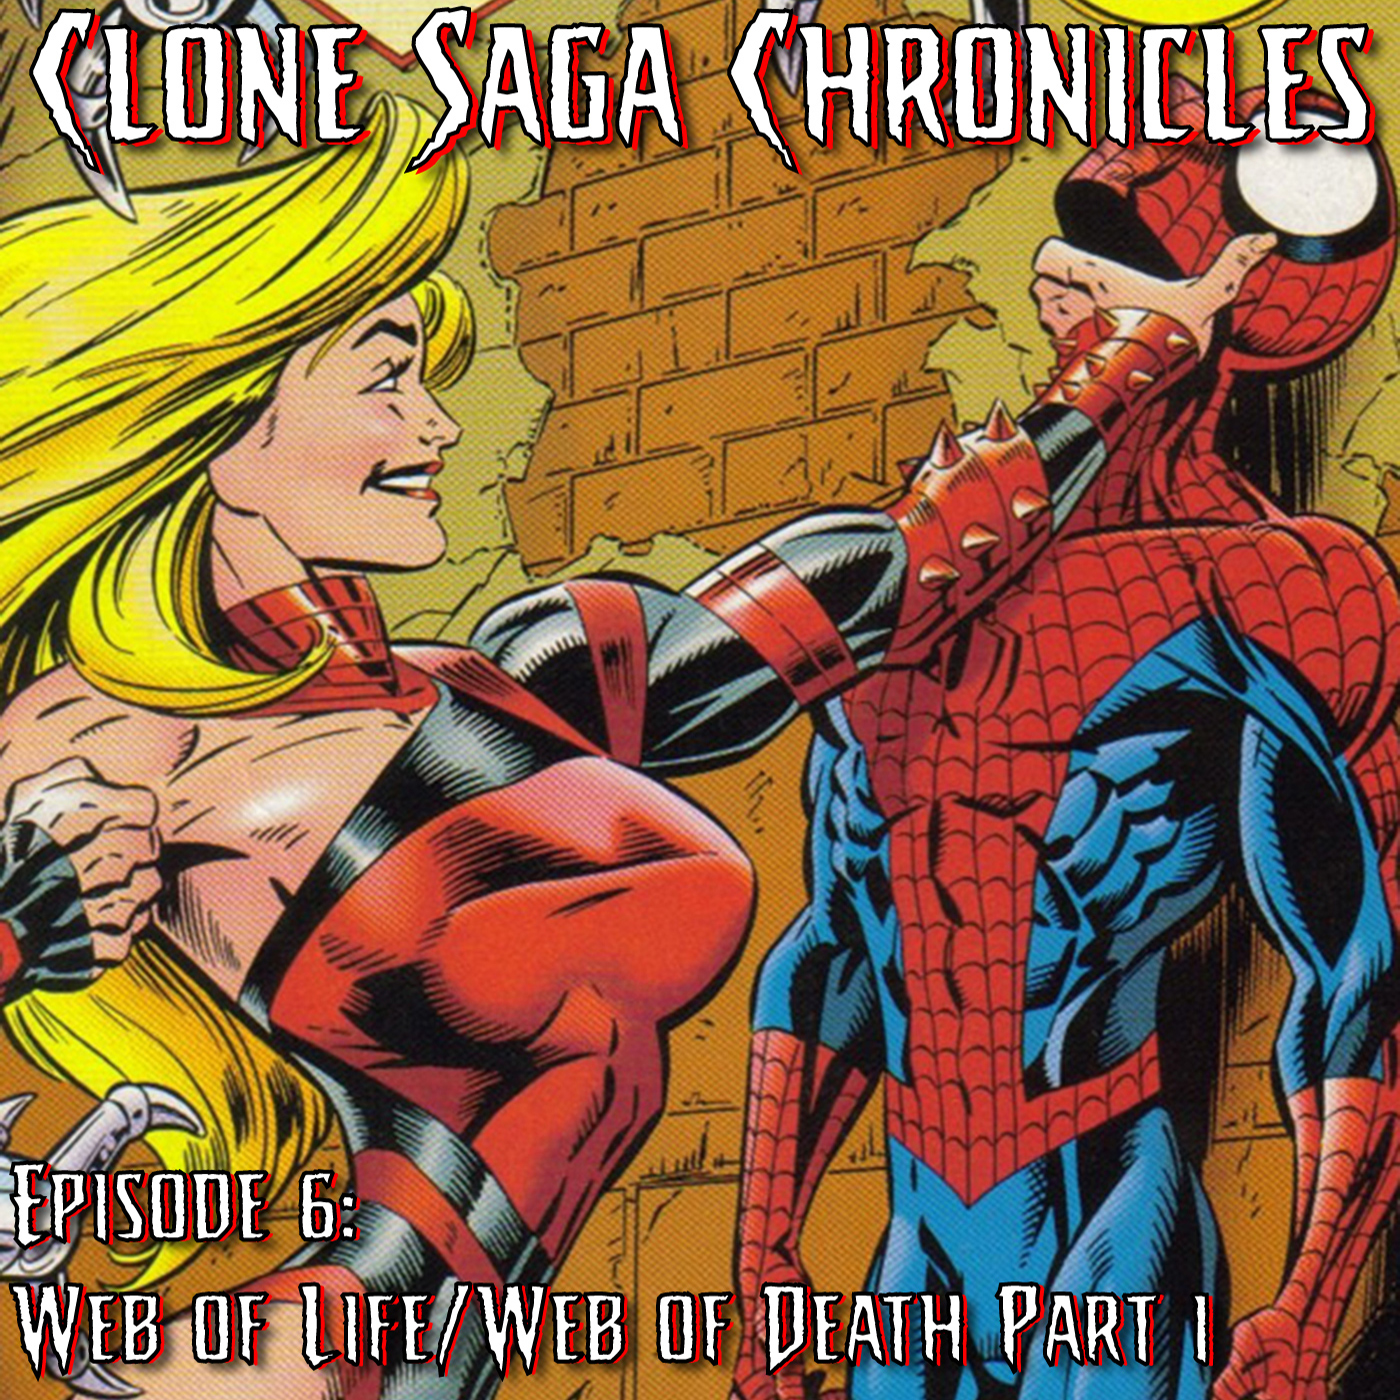 CSC Episode 6: Web of Death/Life Month 1 (Cover Date January 1995)